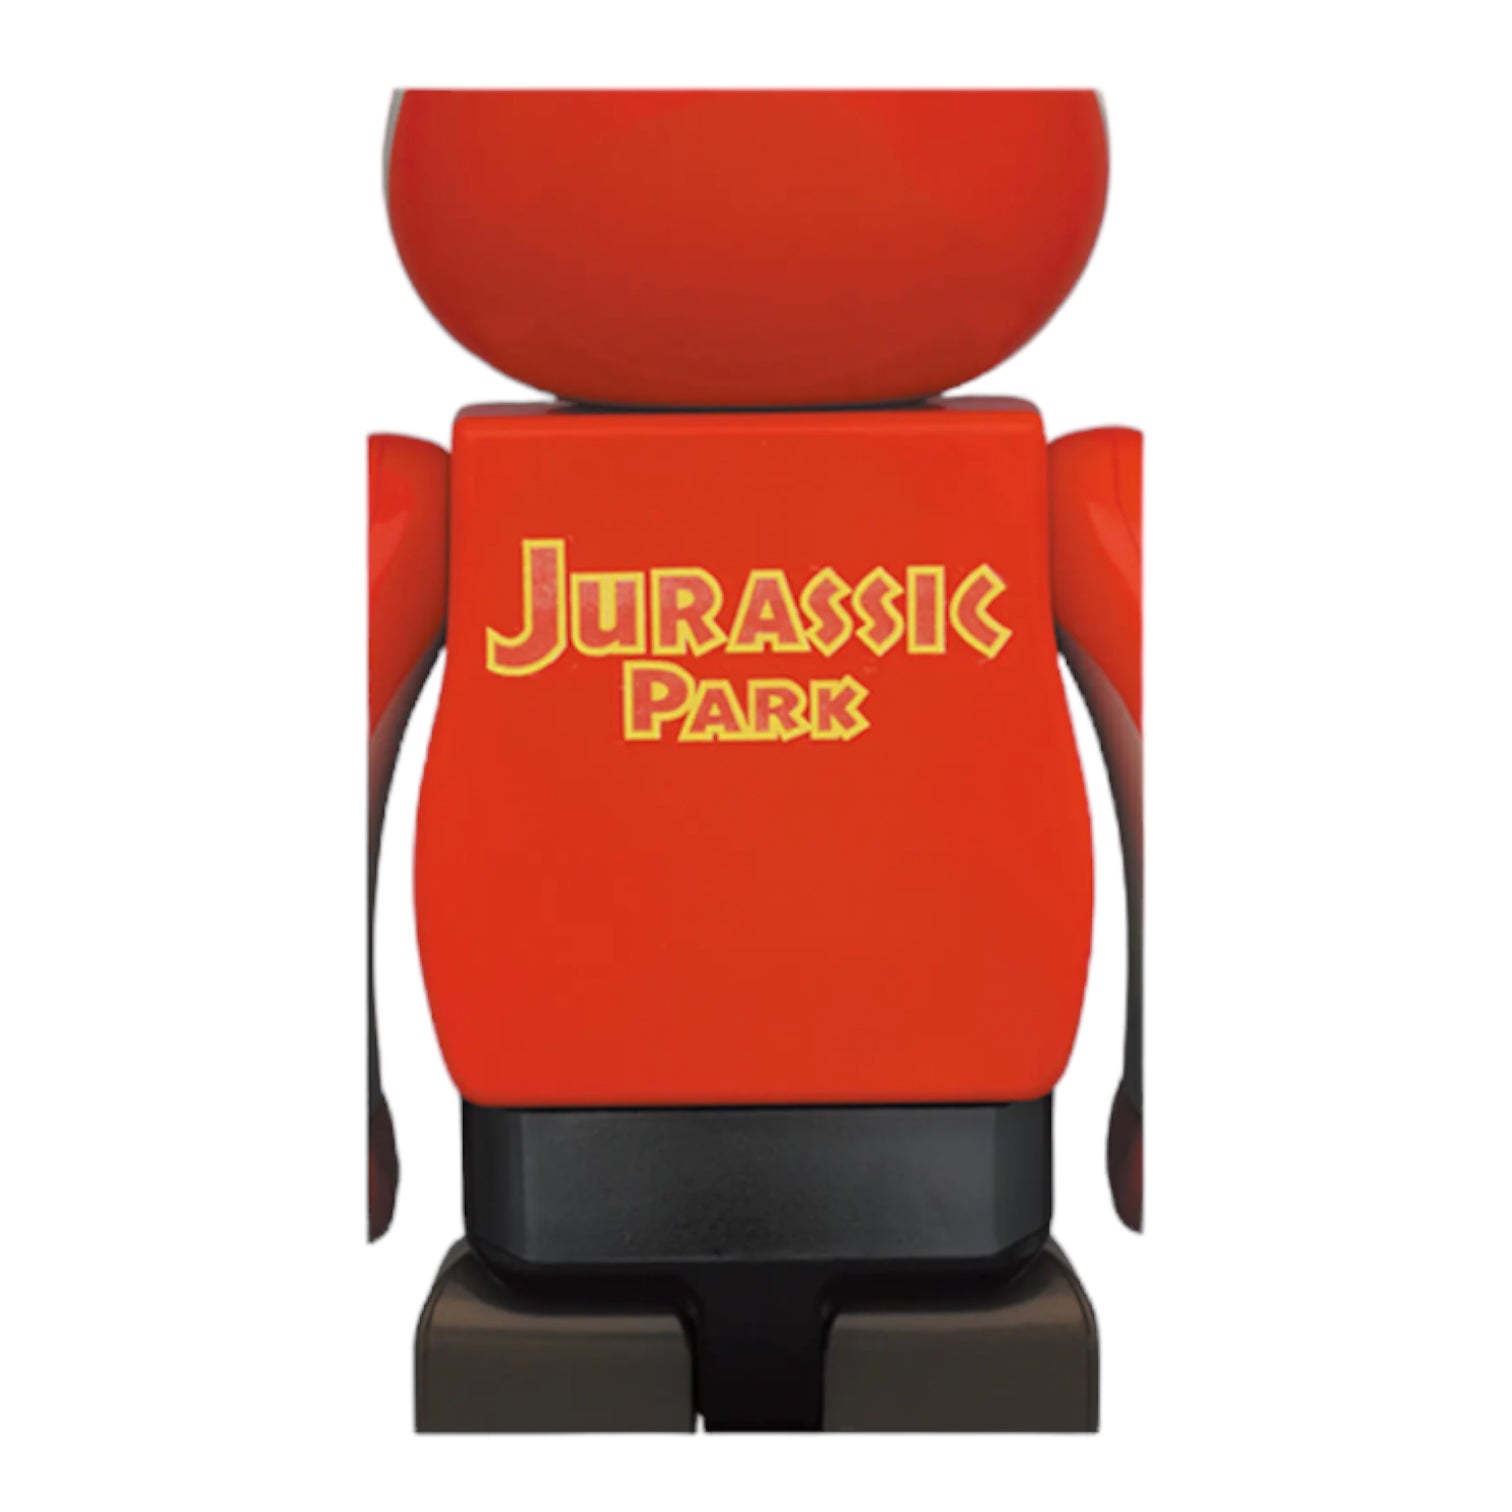 Bearbrick Jurassic Park 1000% - Red and White Collectible Figurine